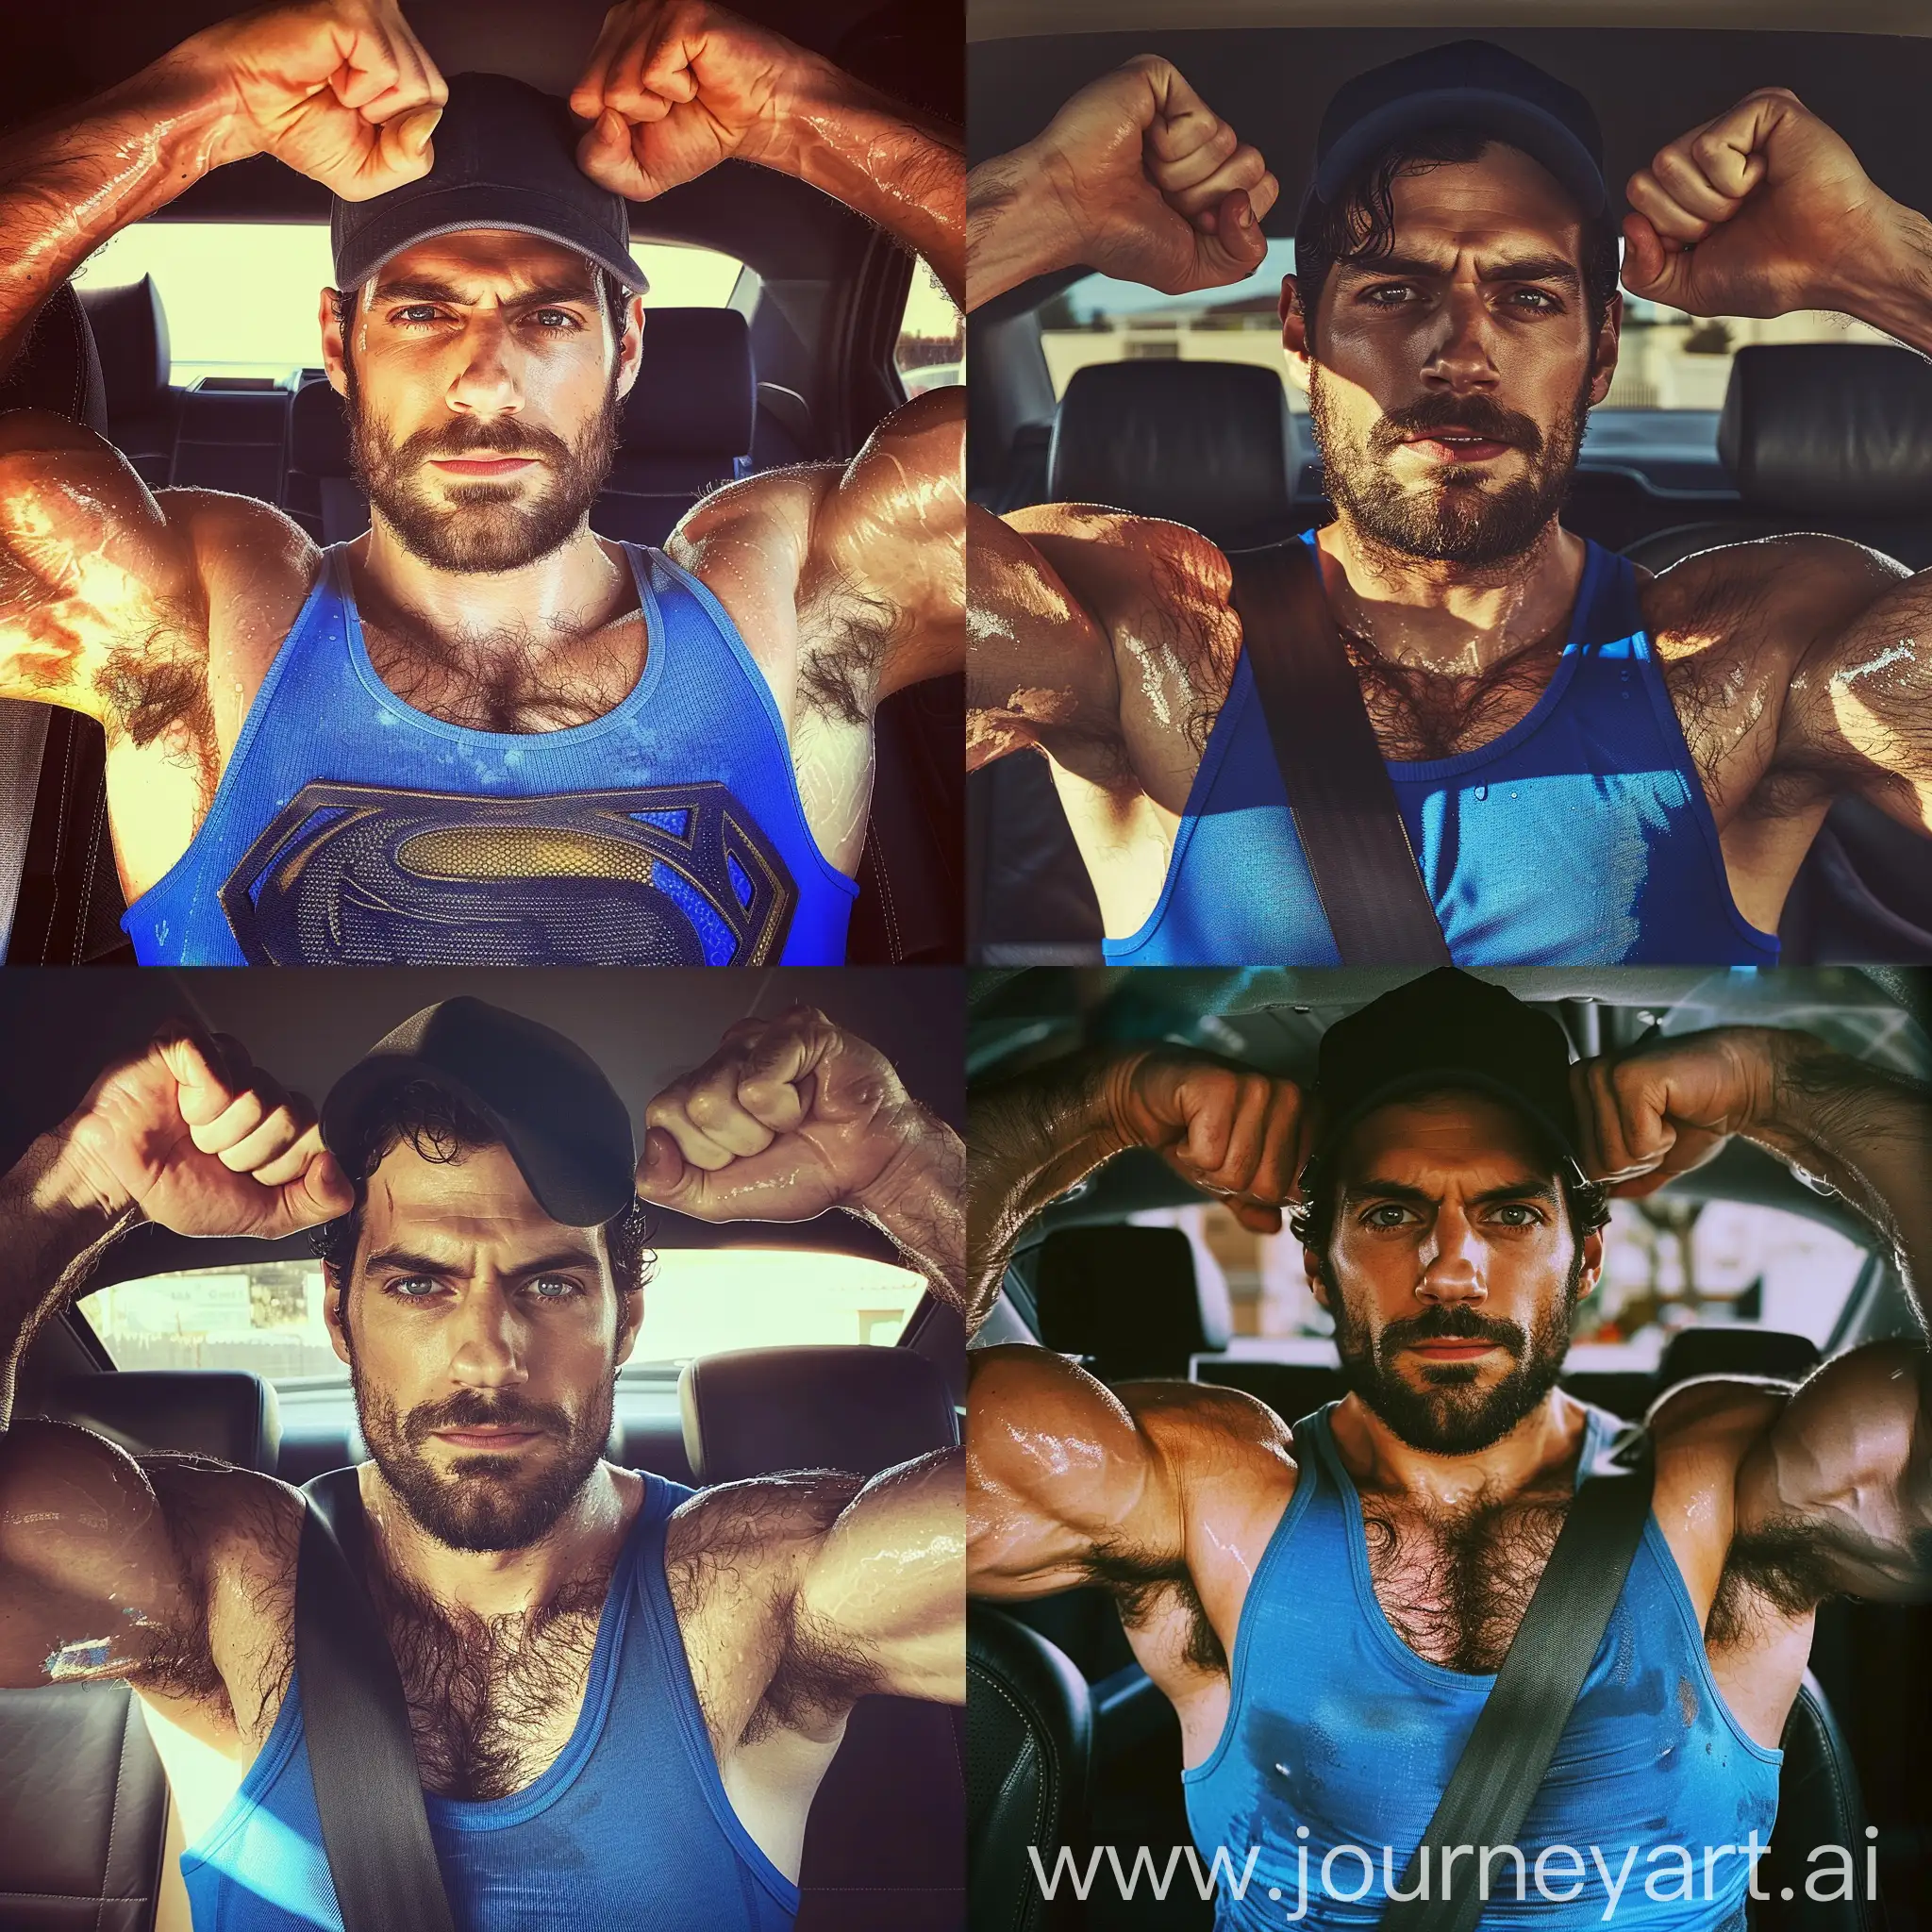 handsome face of actor Henry Cavill, a handsome and burly muscular man in the back seat of the car, wearing a blue tank top, hairy chest big pecs, bearded and handsome Henry Cavill inside a car, dim lighting, sweaty and glistening skin, flexing both his arms, big muscular biceps, wearing a black cap, daylight background